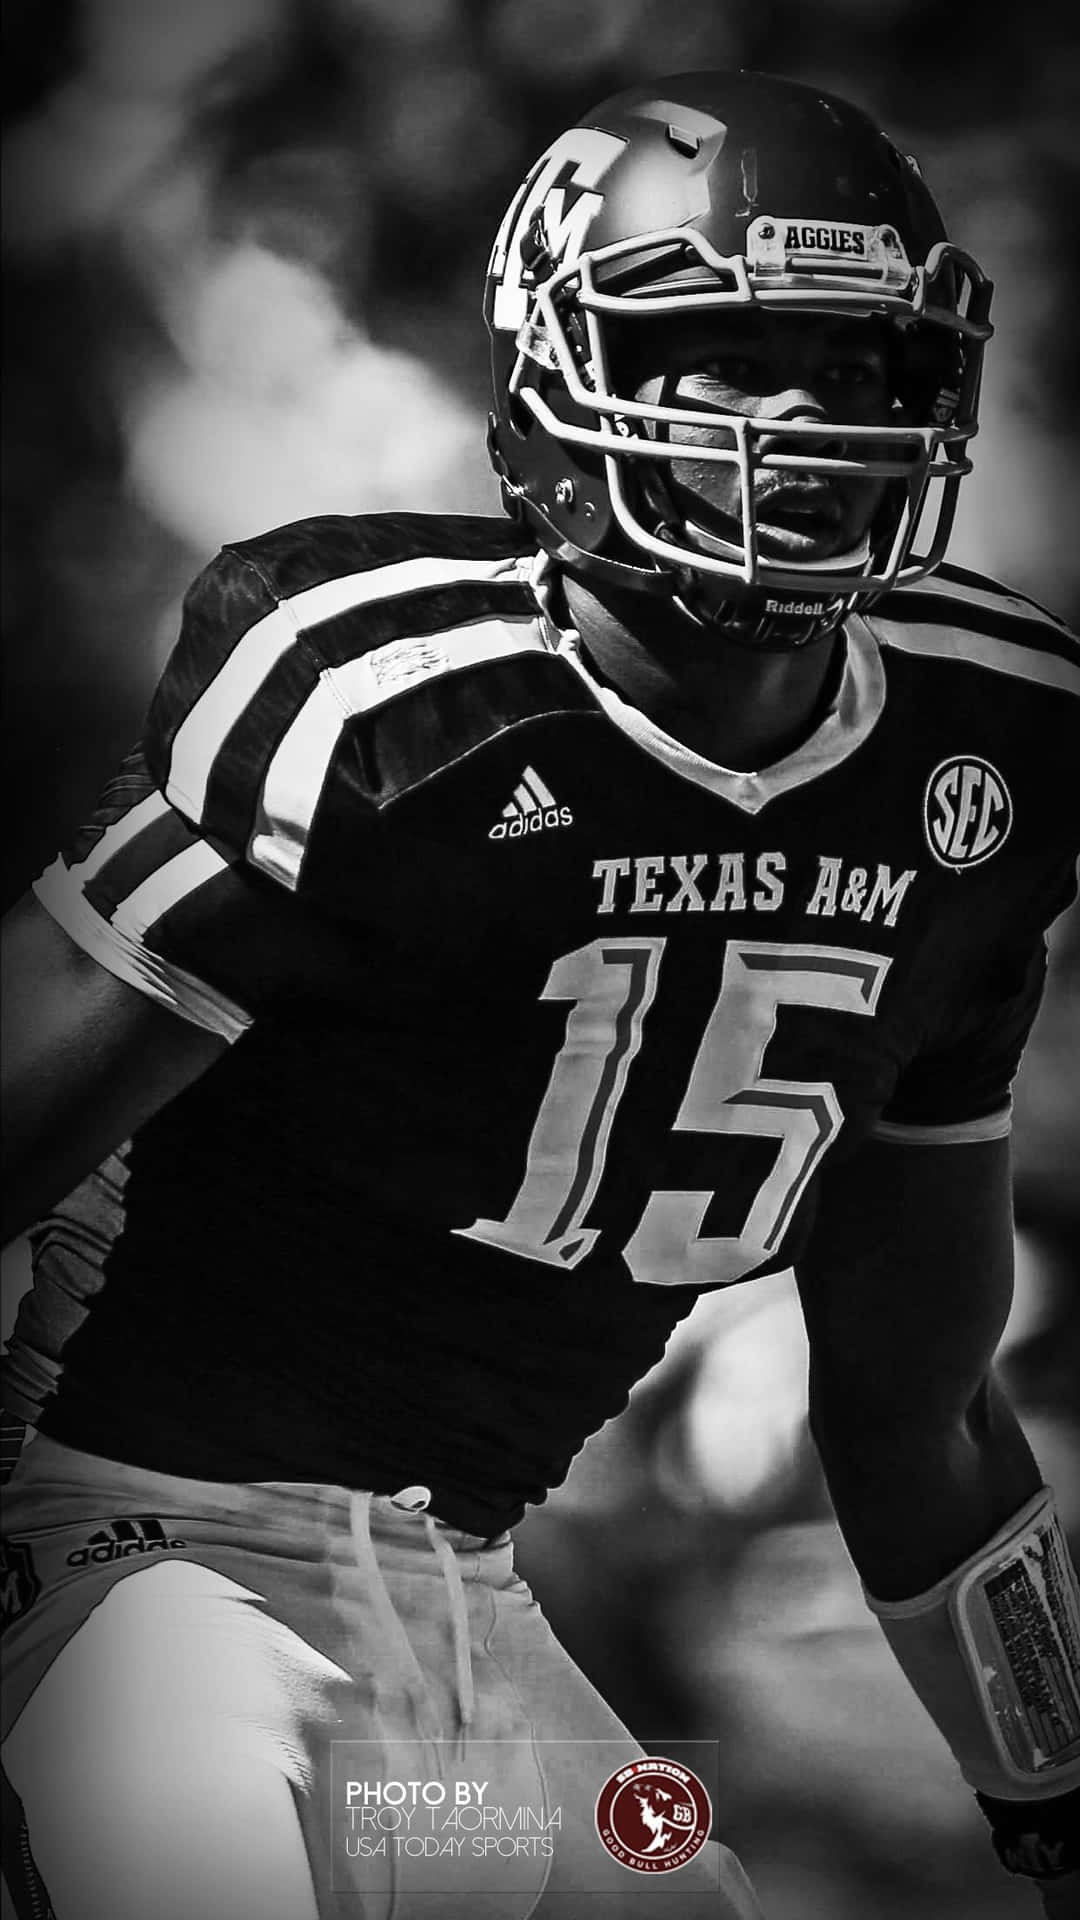 A Black And White Photo Of A Football Player Wallpaper